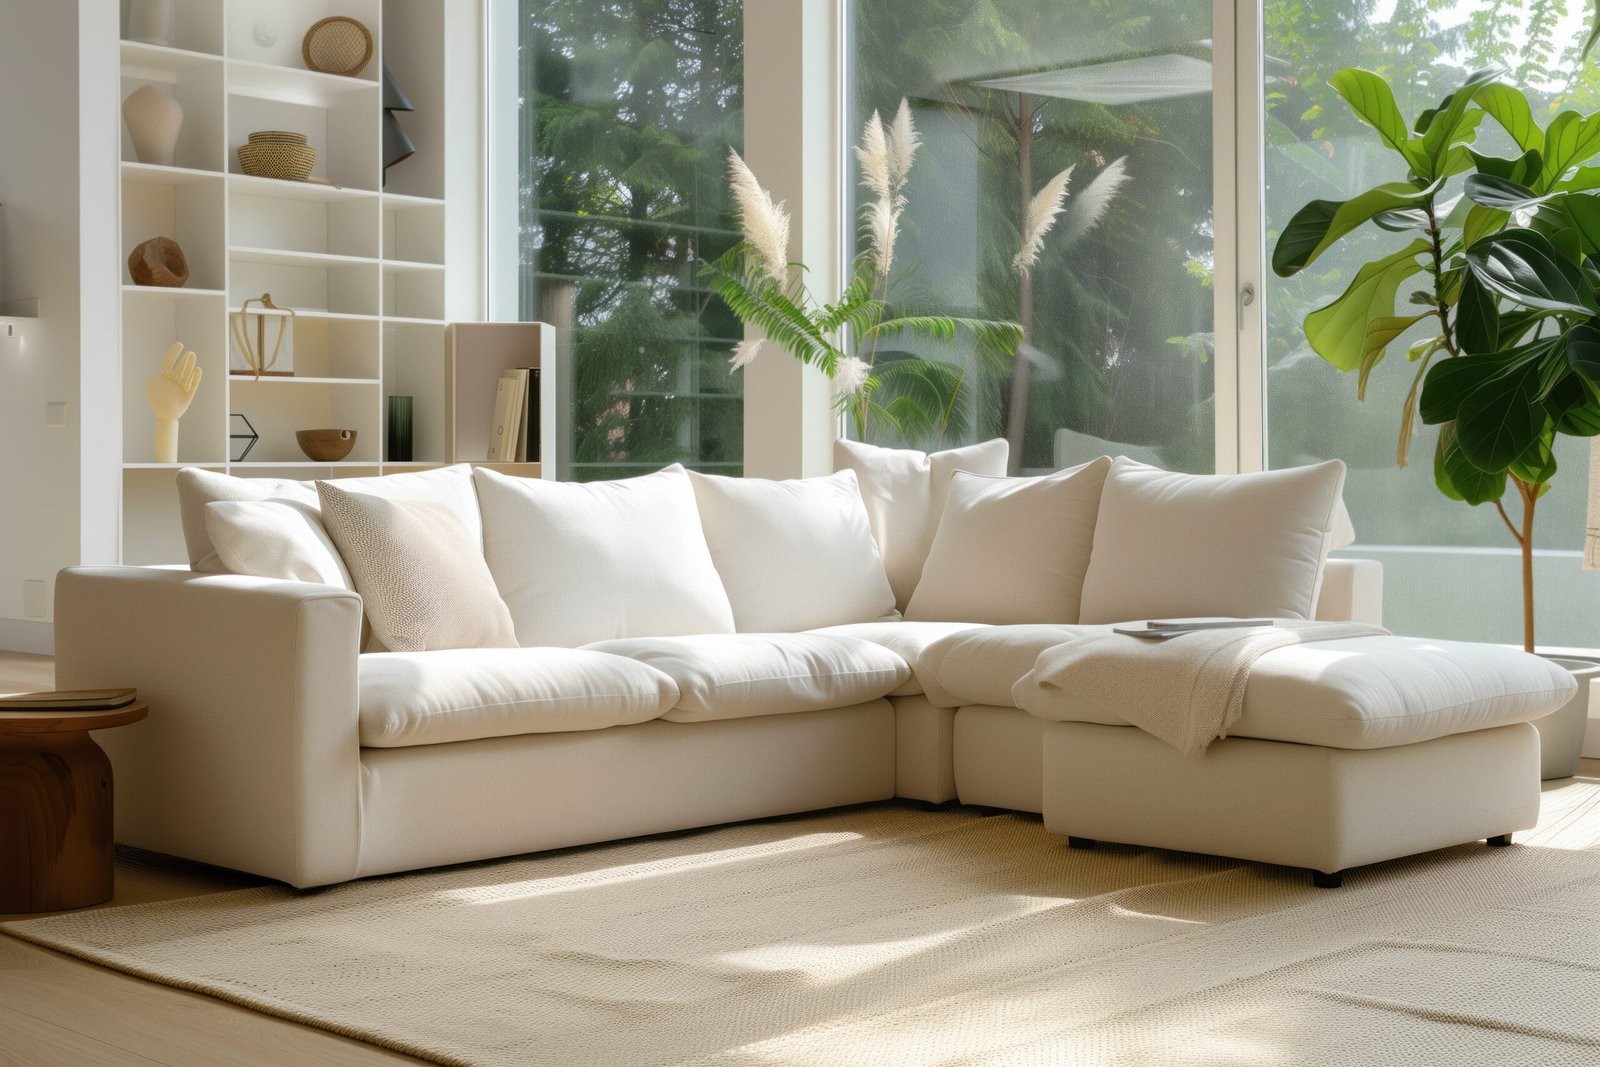 Best Sectional Sofas to Buy in UAE